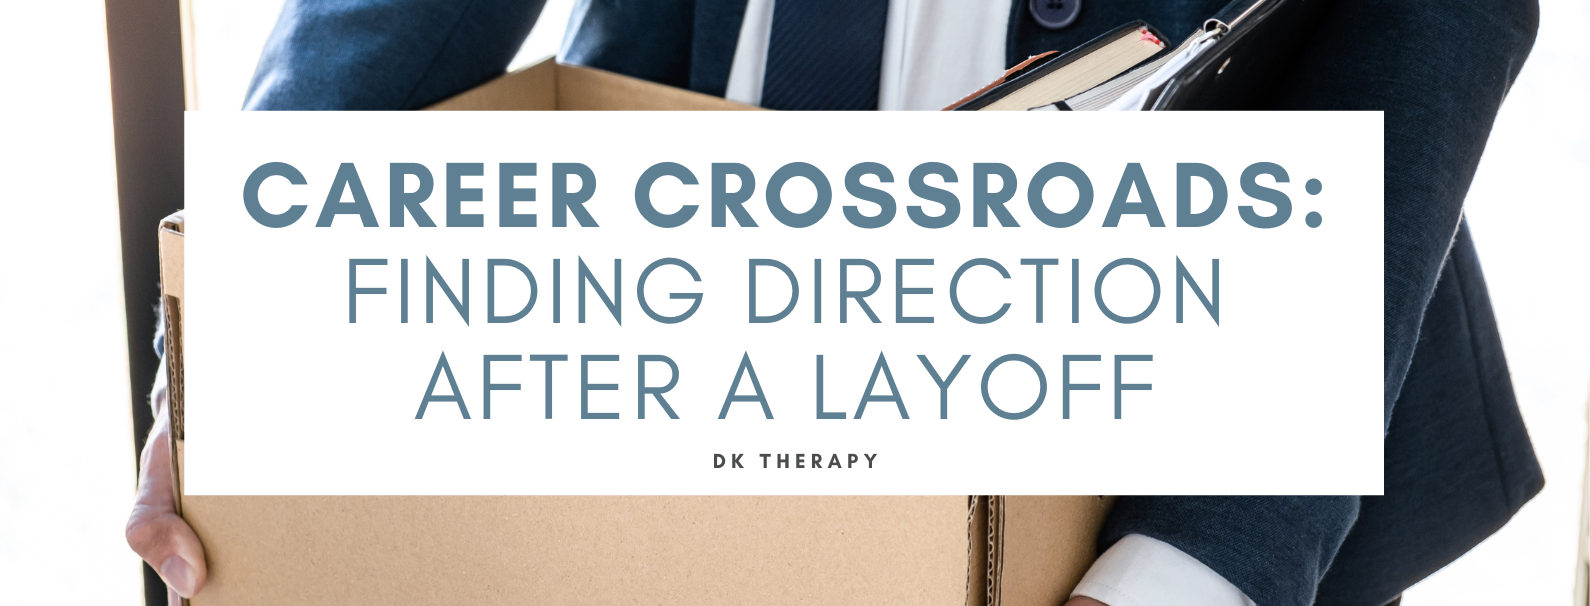 Career Crossroads: Finding Direction After a Layoff